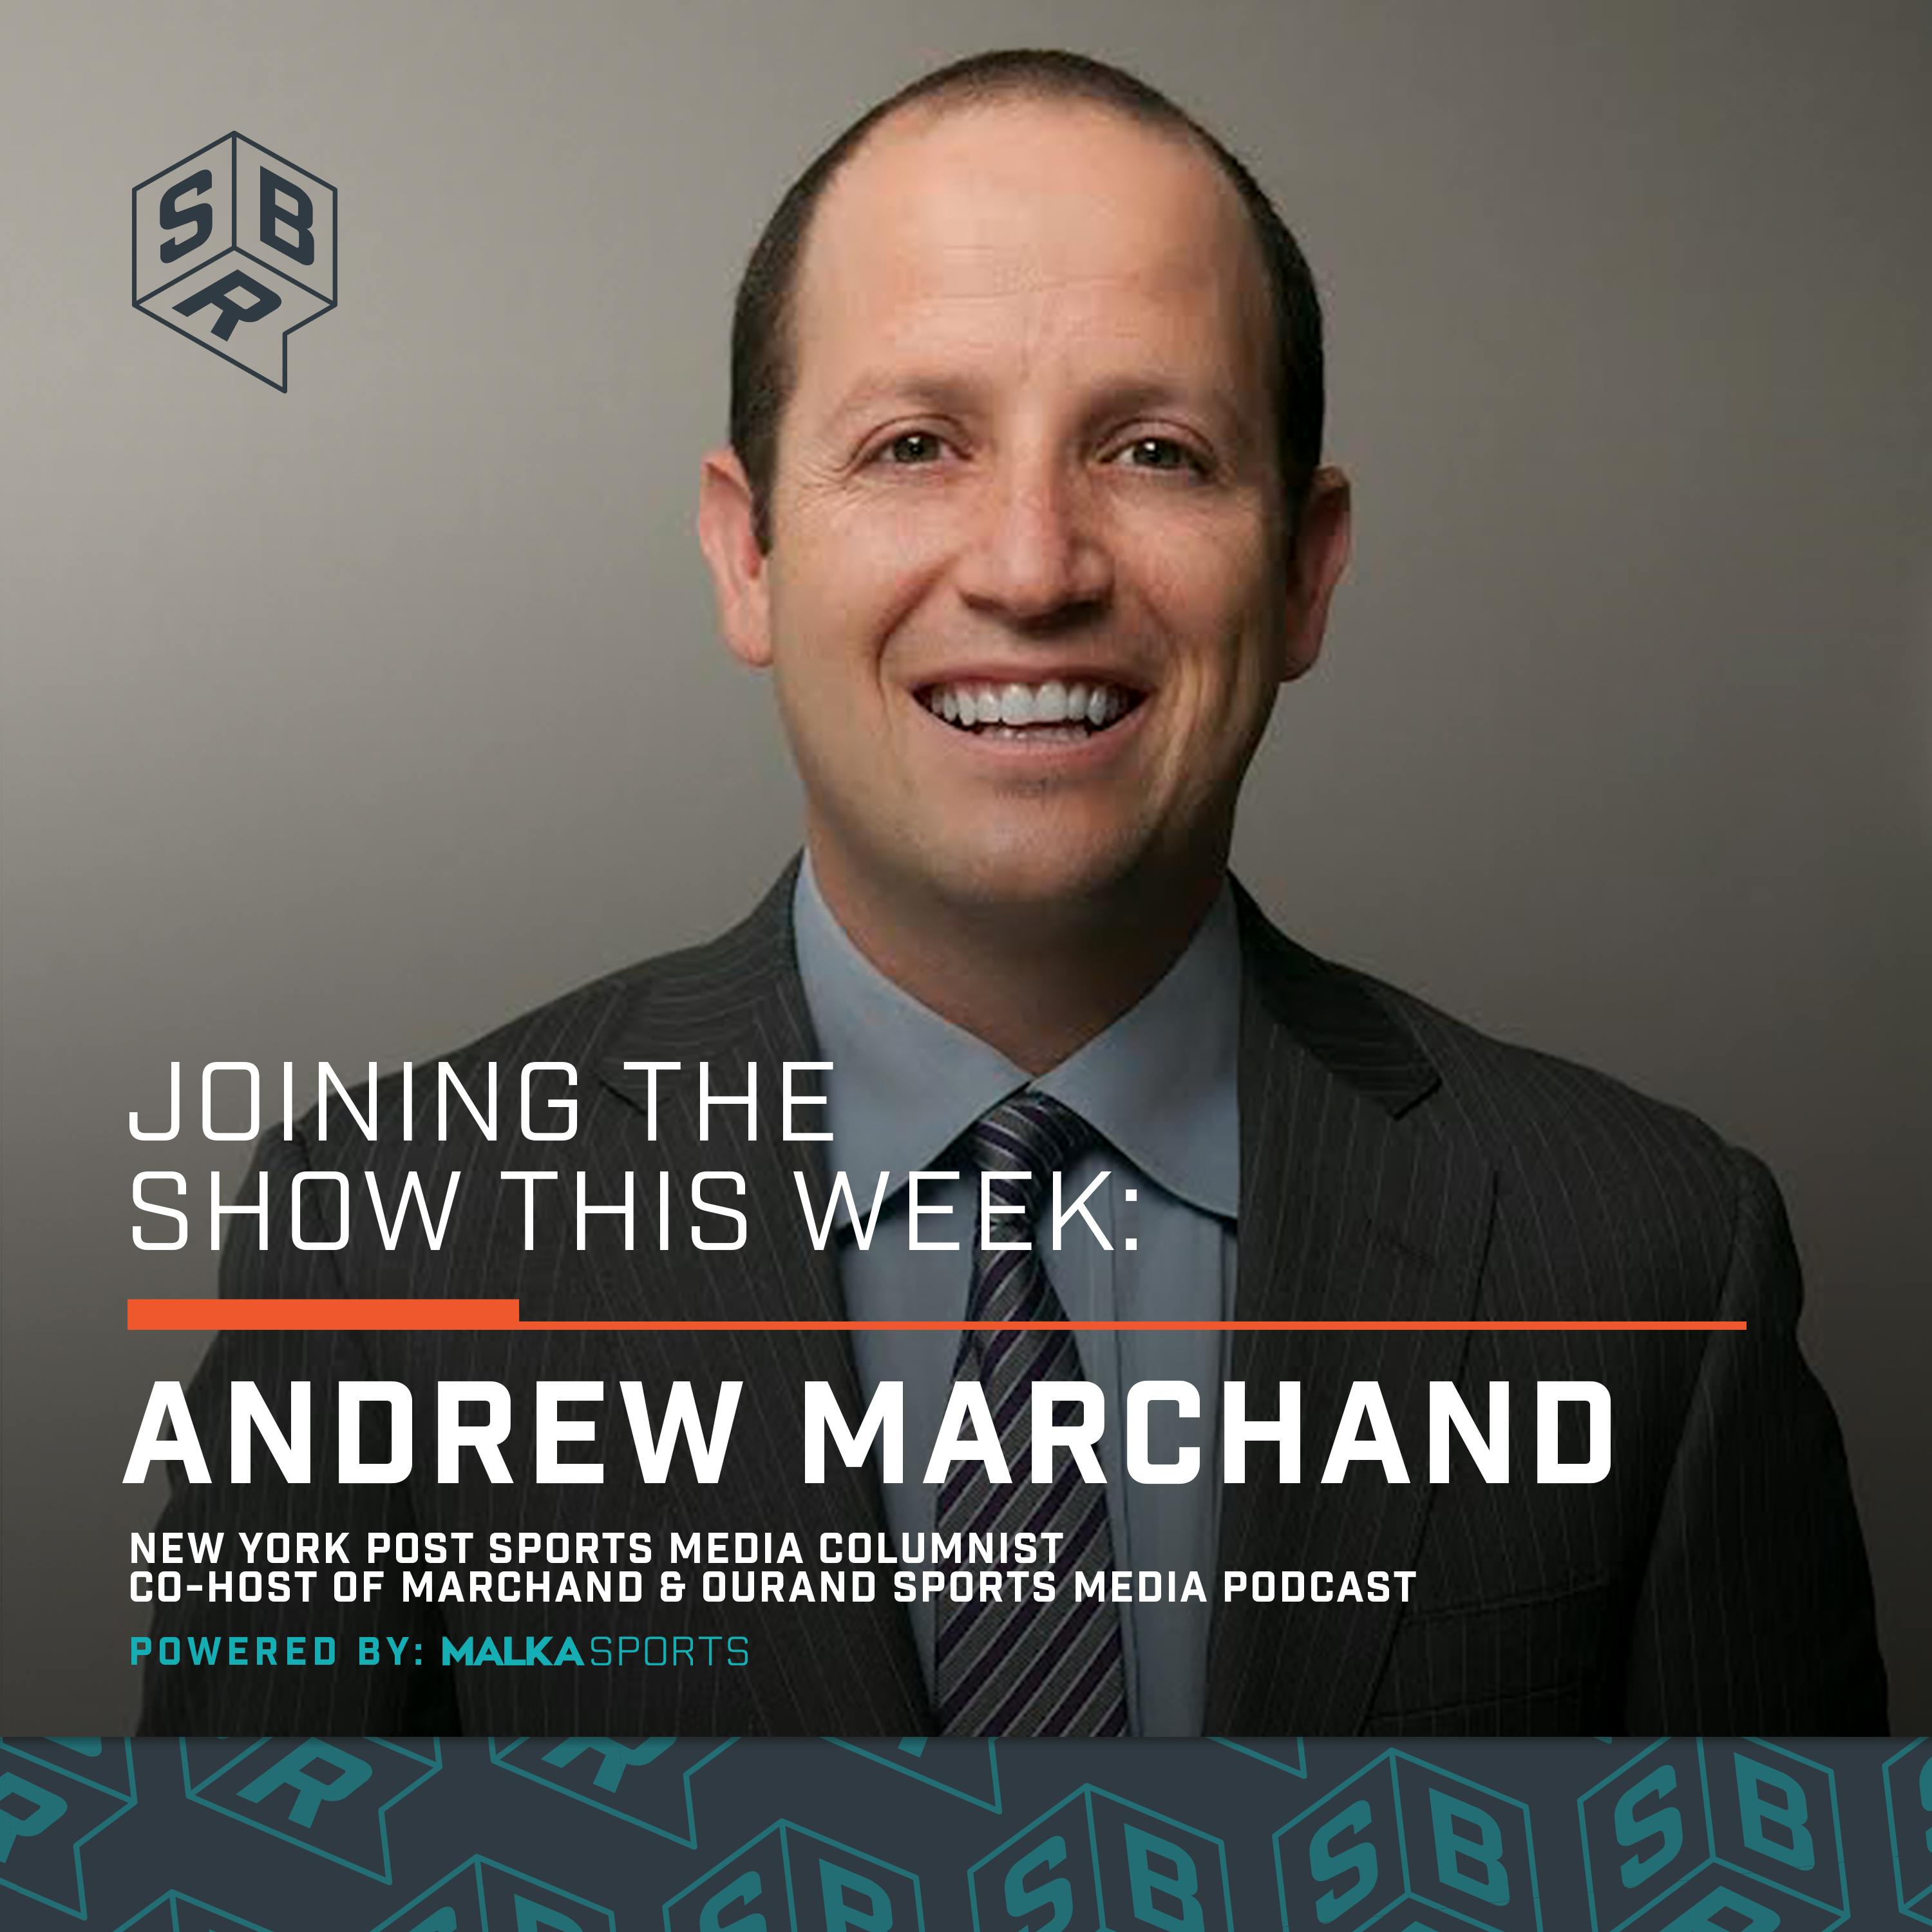 Andrew Marchand - New York Post sports media columnist and Co-Host of Marchand & Ourand Sports Media podcast